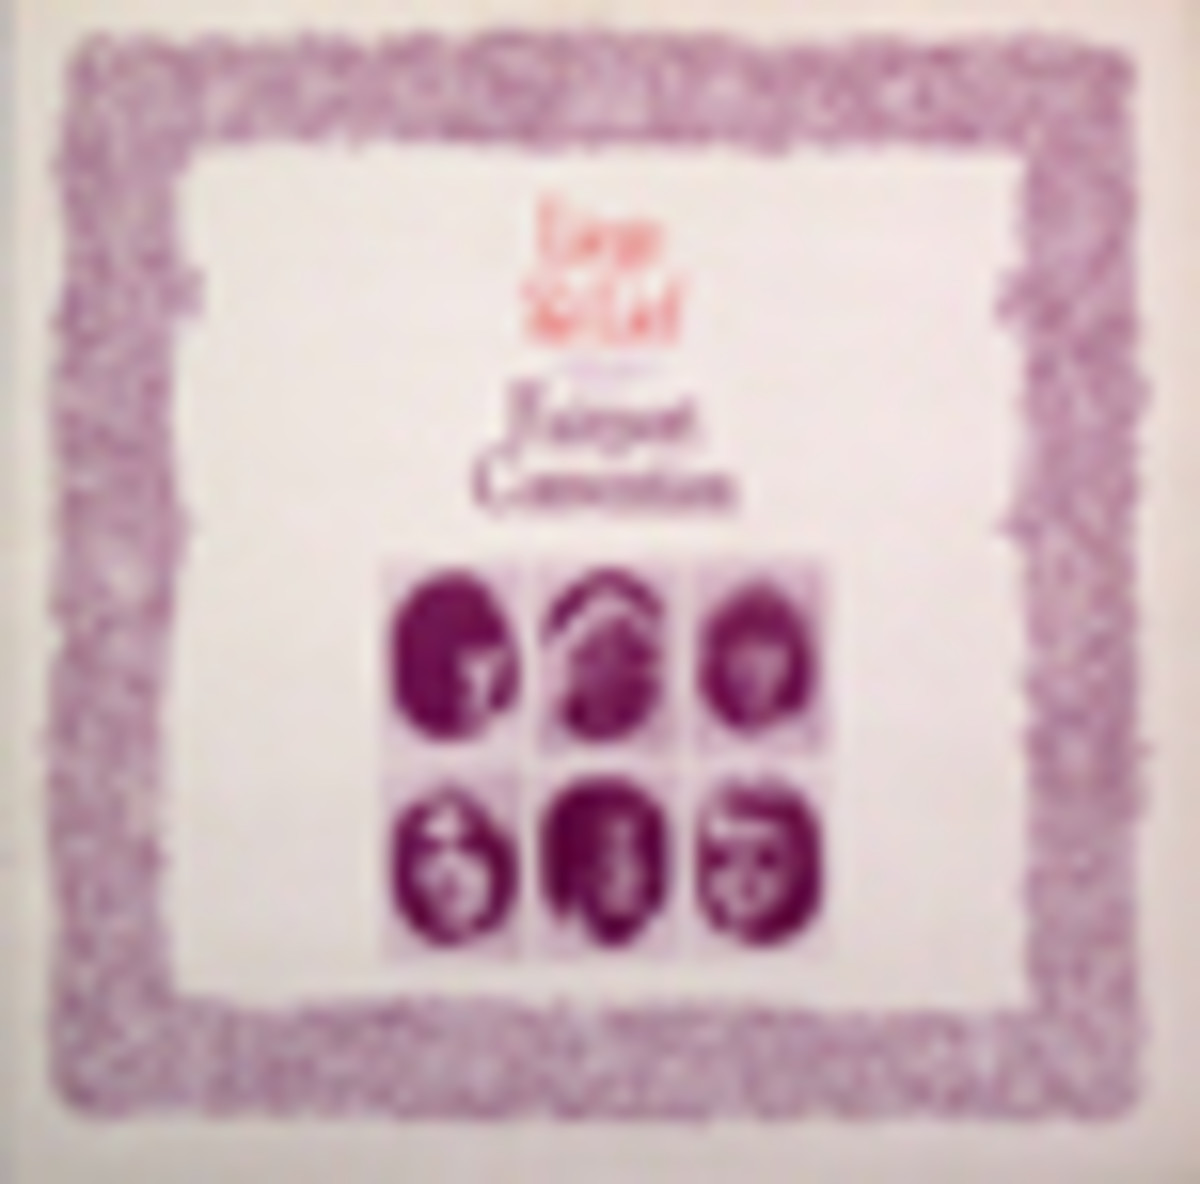 Fairport Convention Liege and Lief